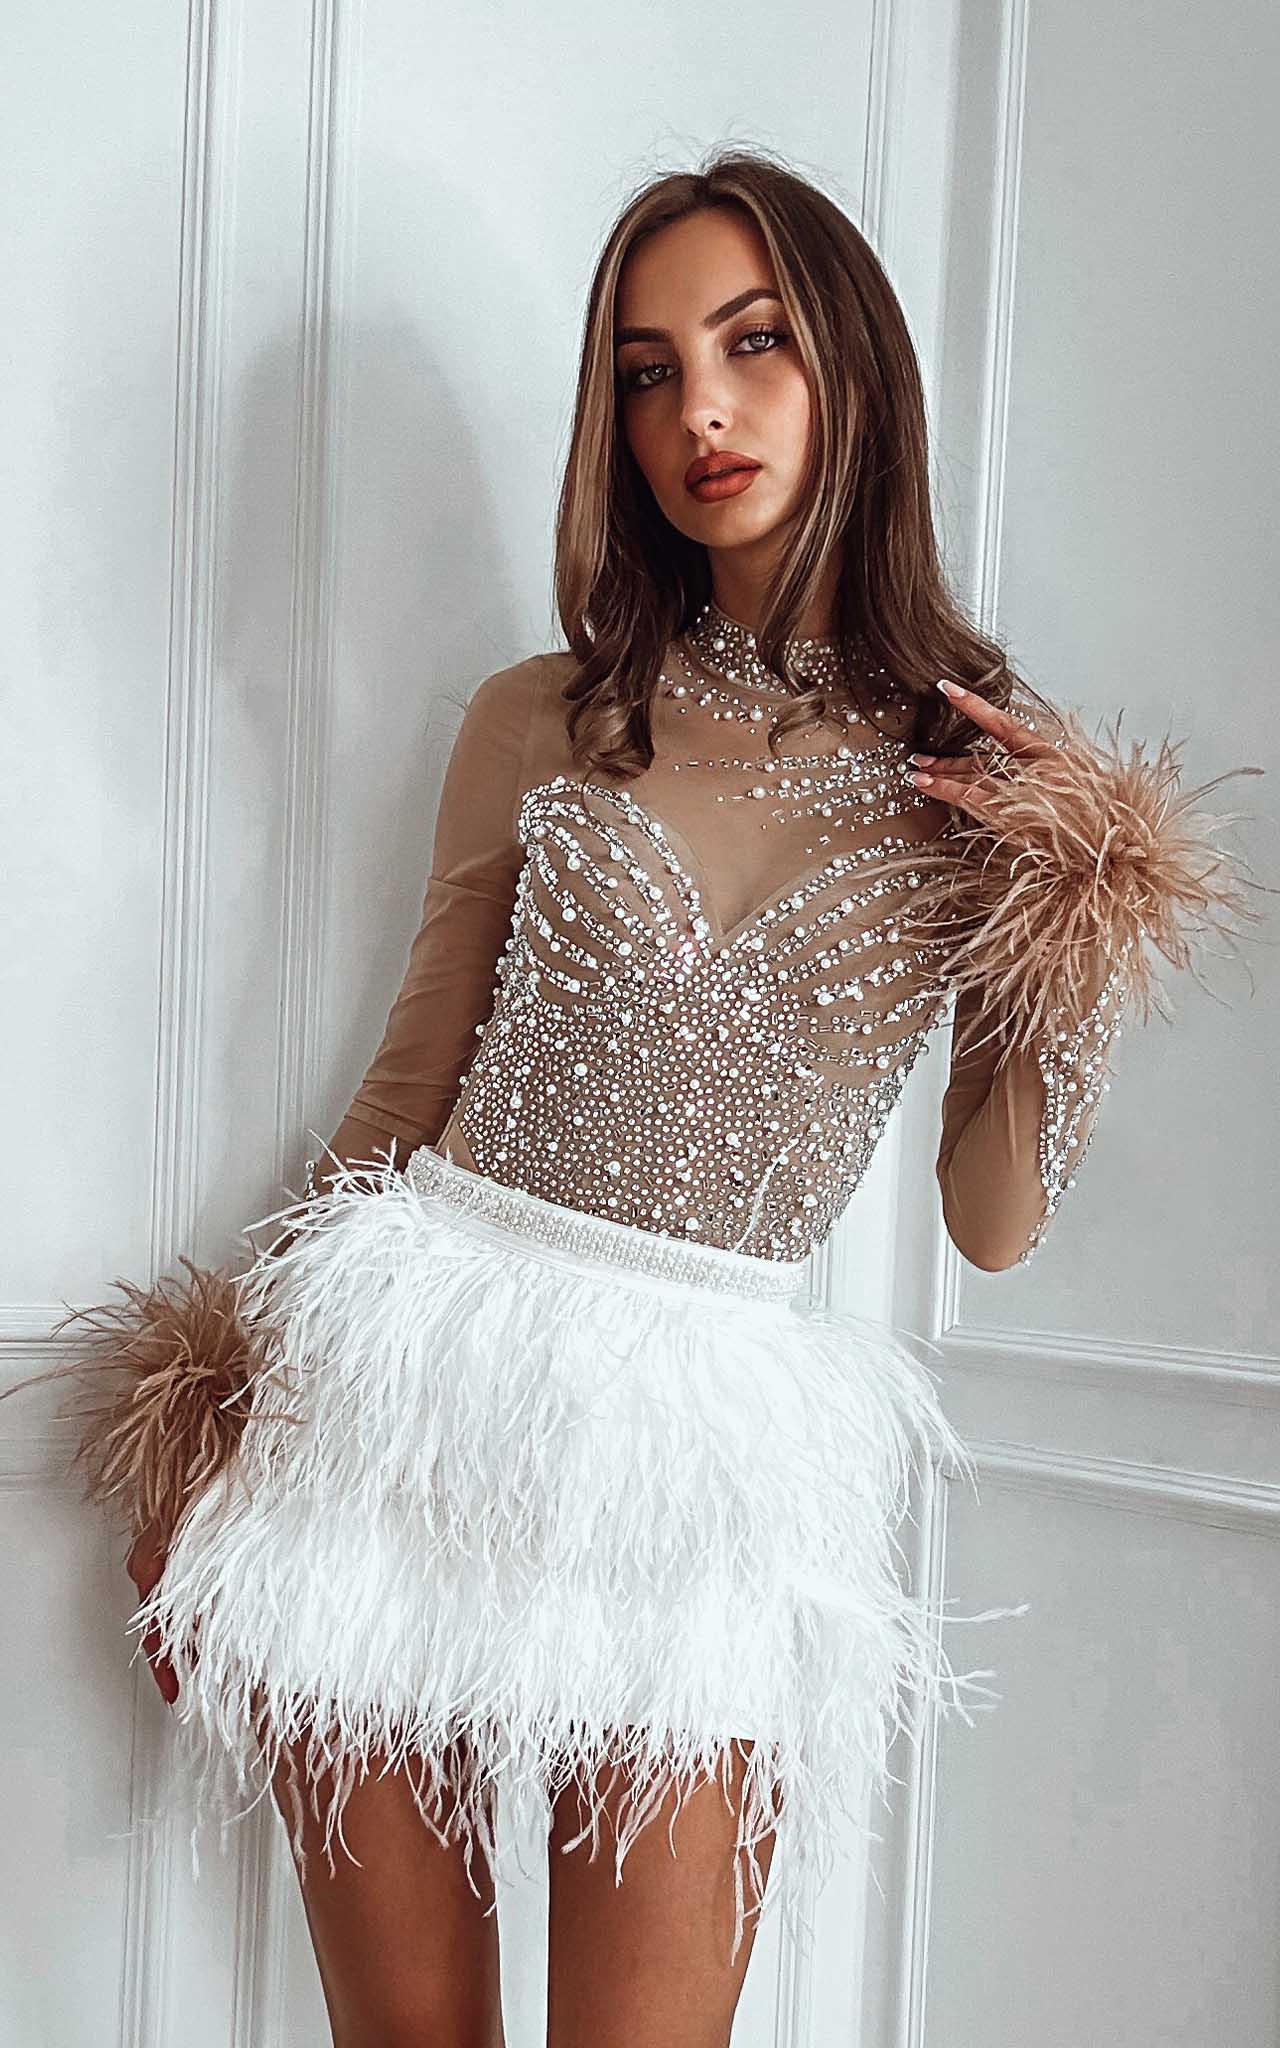 The Glamiest around White Embellished Bodysuit With Feathers cuffs